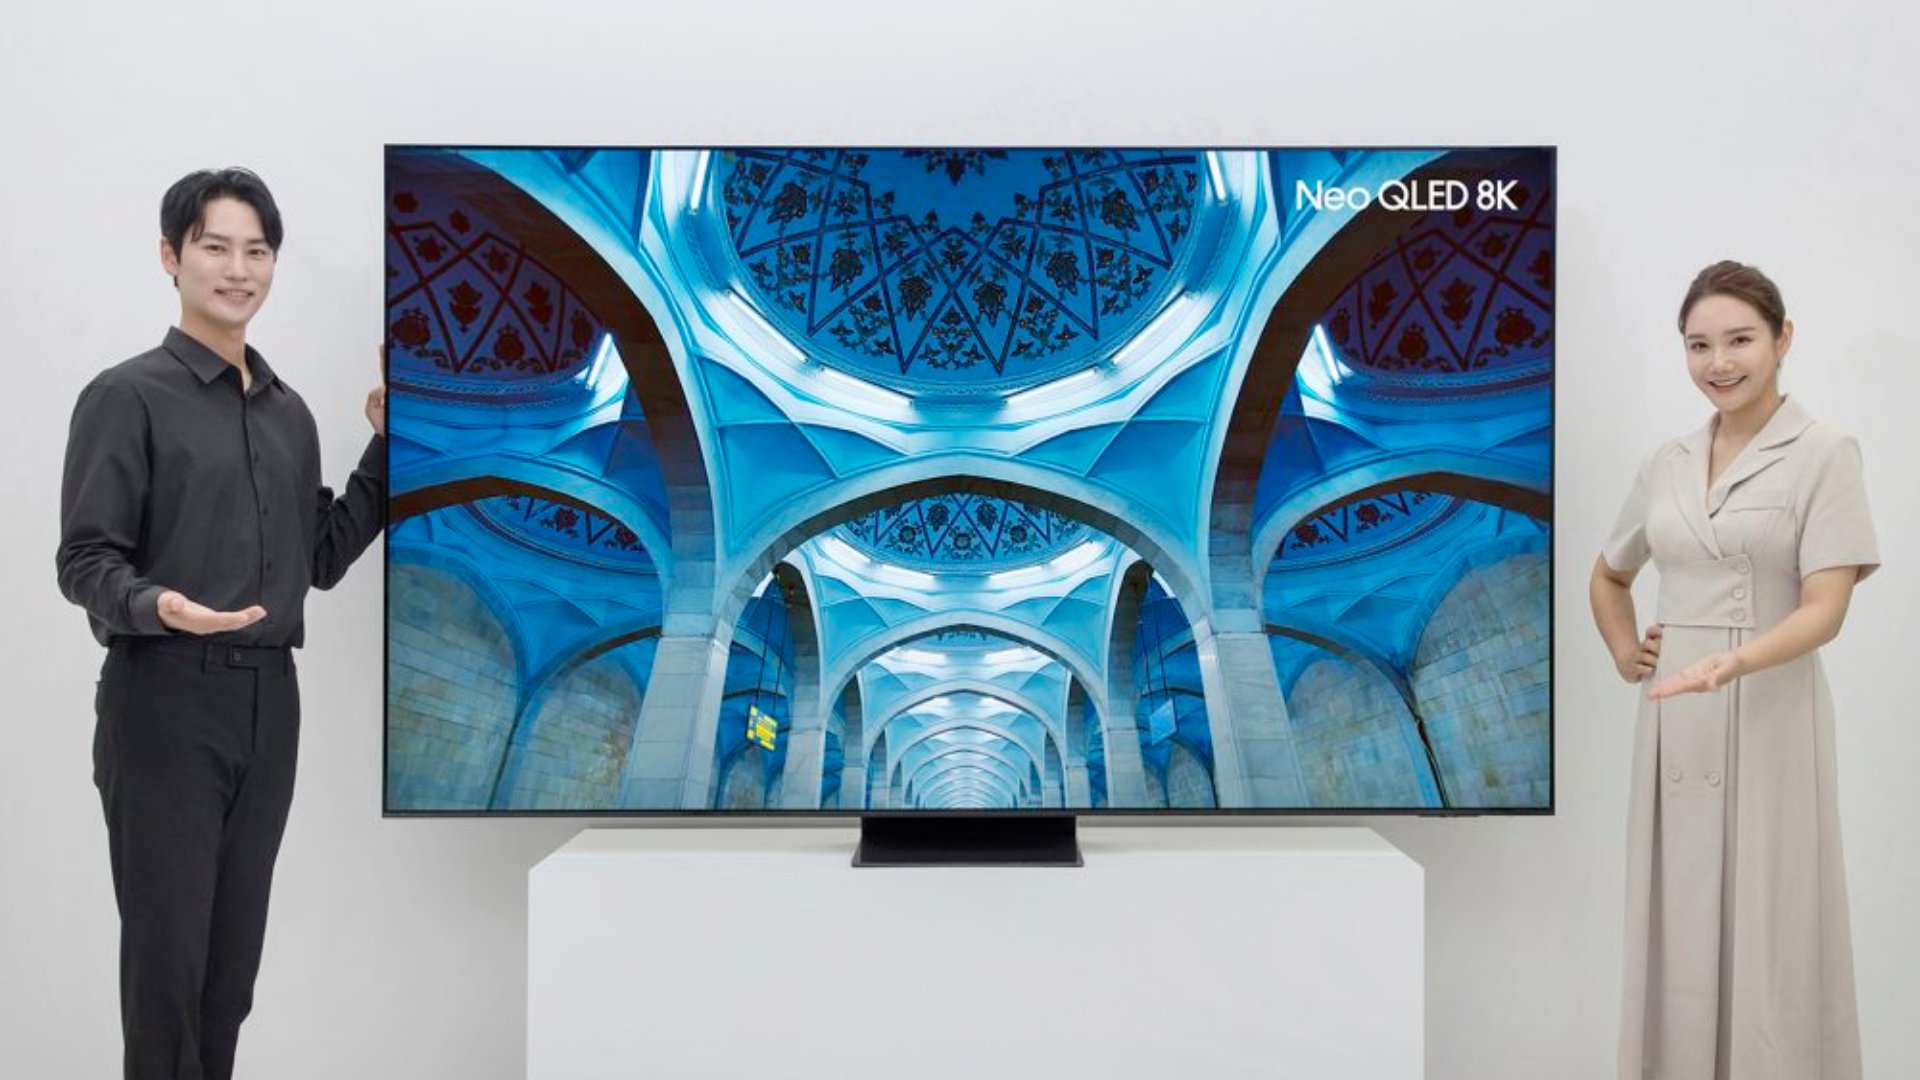 Use the Game Bar on your 2023 Samsung QLED TV